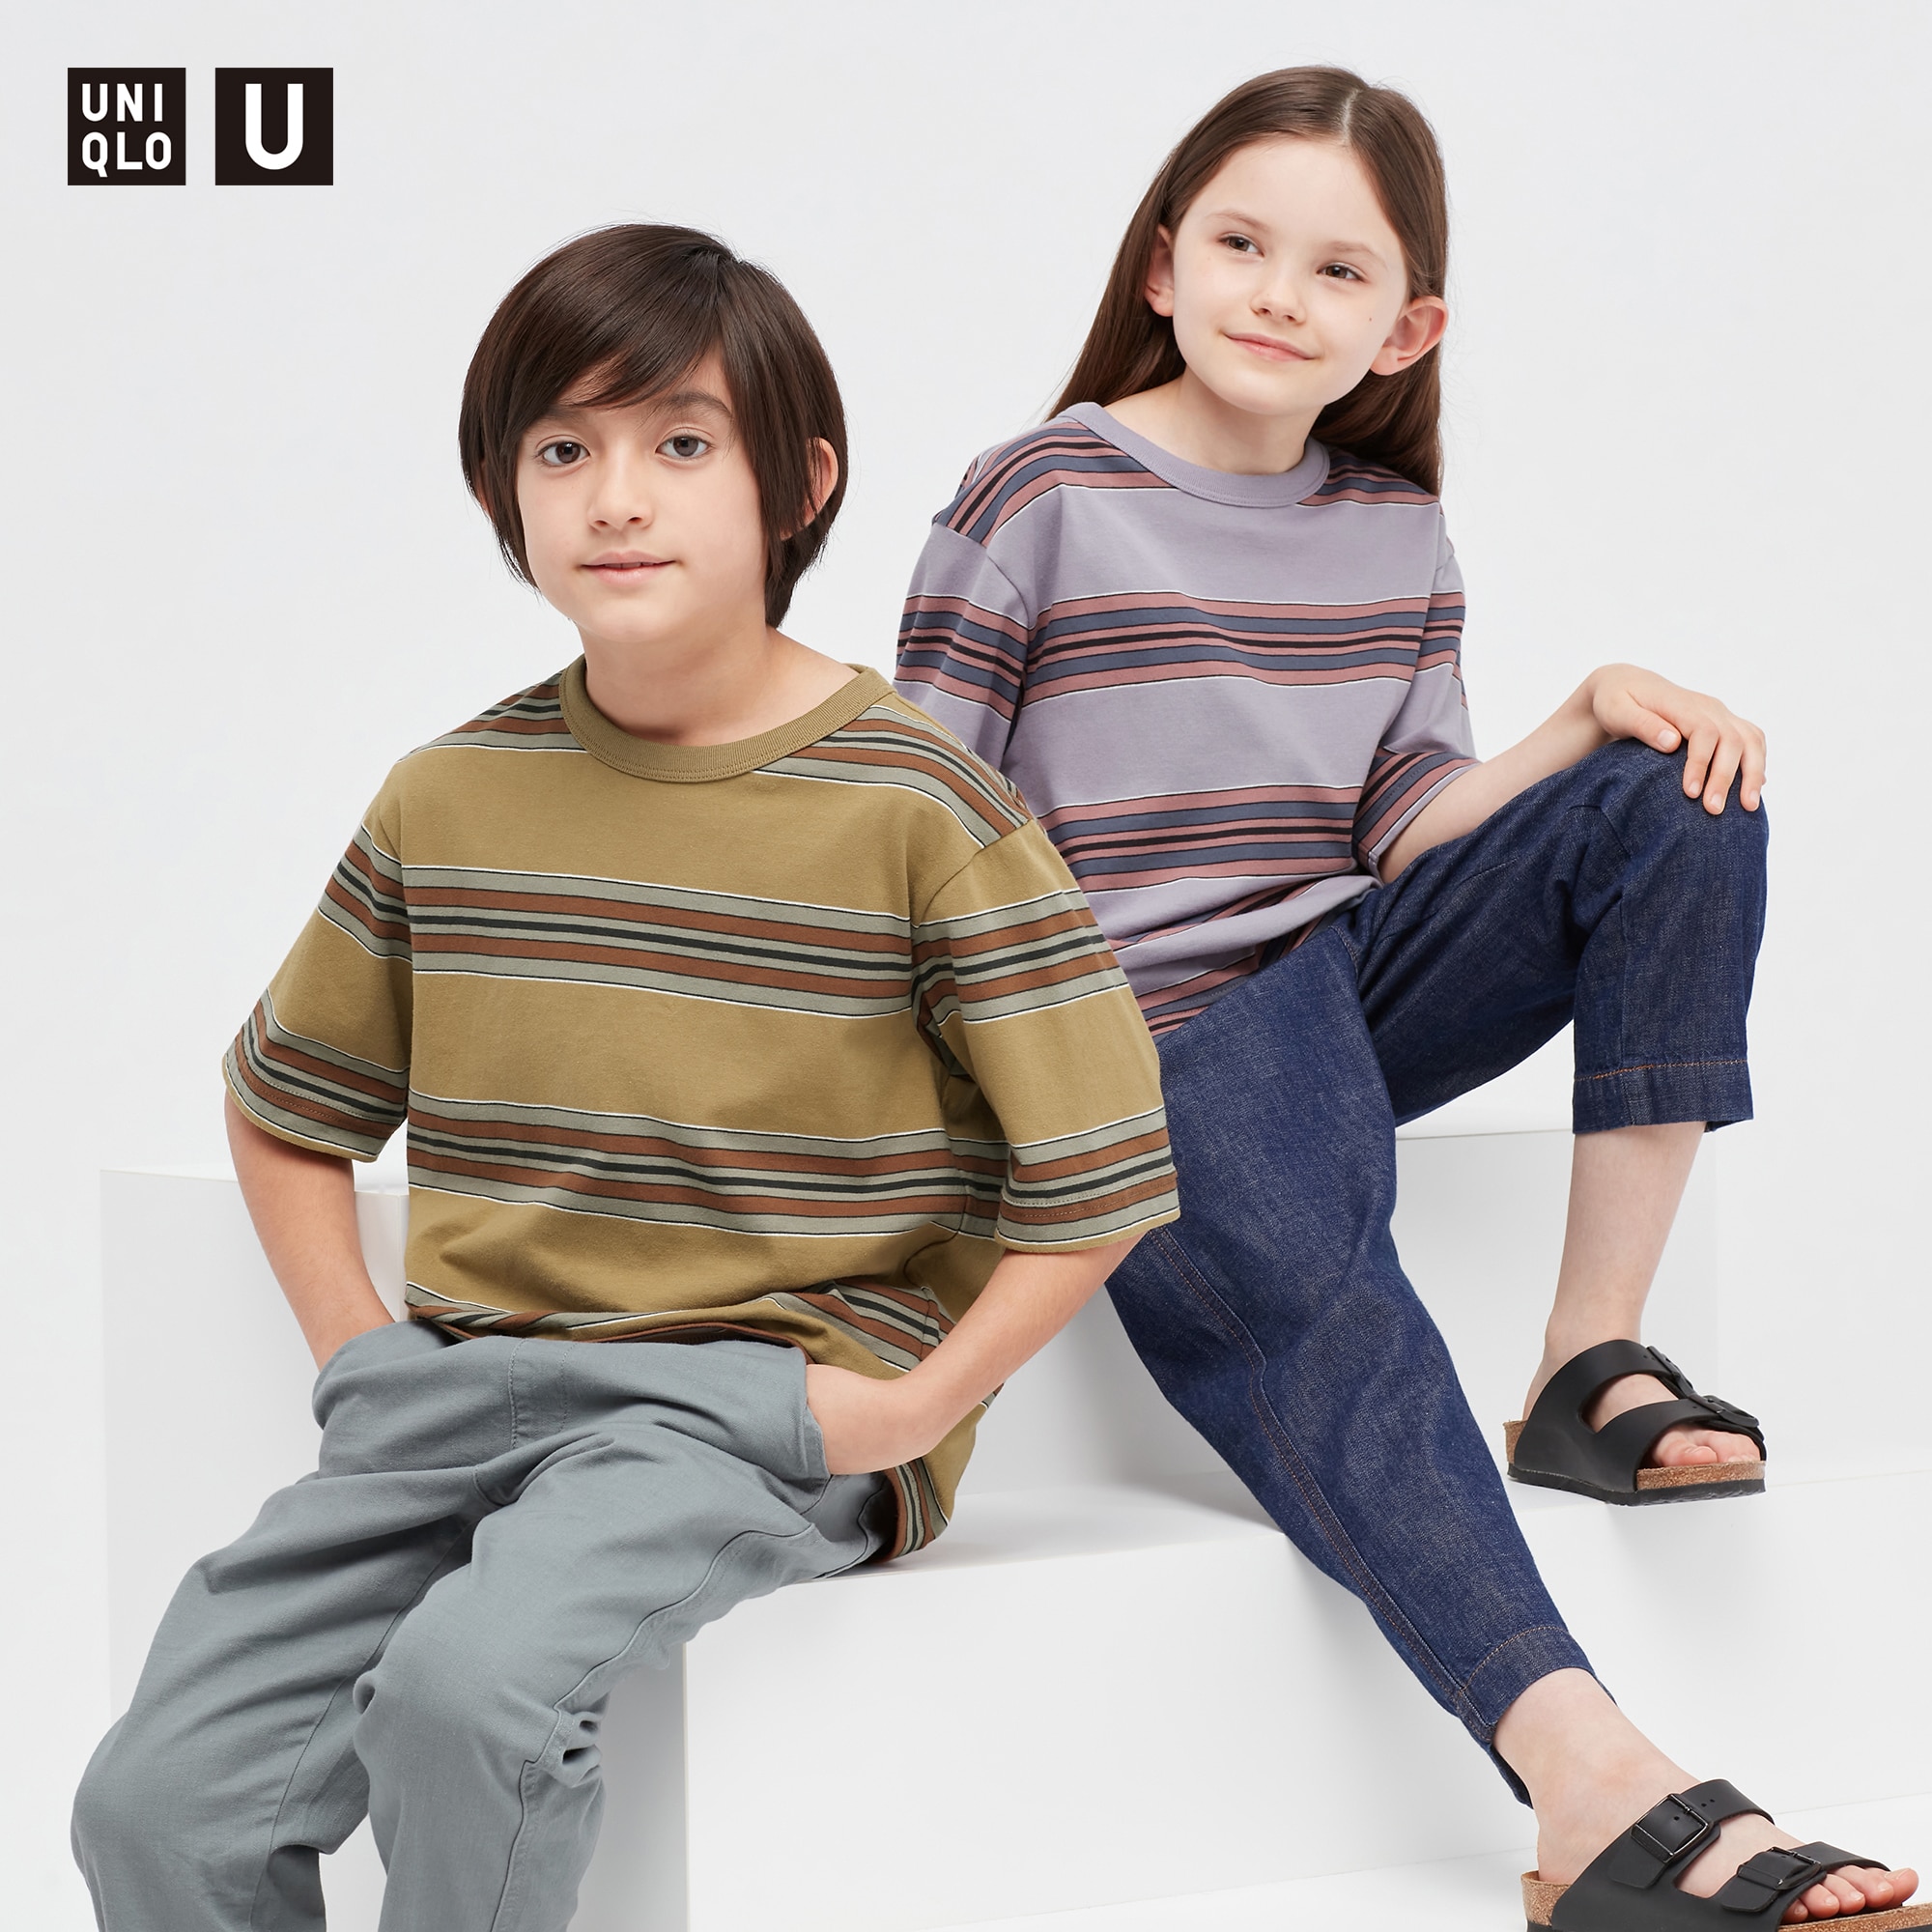 ALWAYSONE Kids Cotton Tee Long Sleeve Shirts Stripe and Solid T Shirts Crewneck T-Shirt for Boys Girls 3-12 Years 